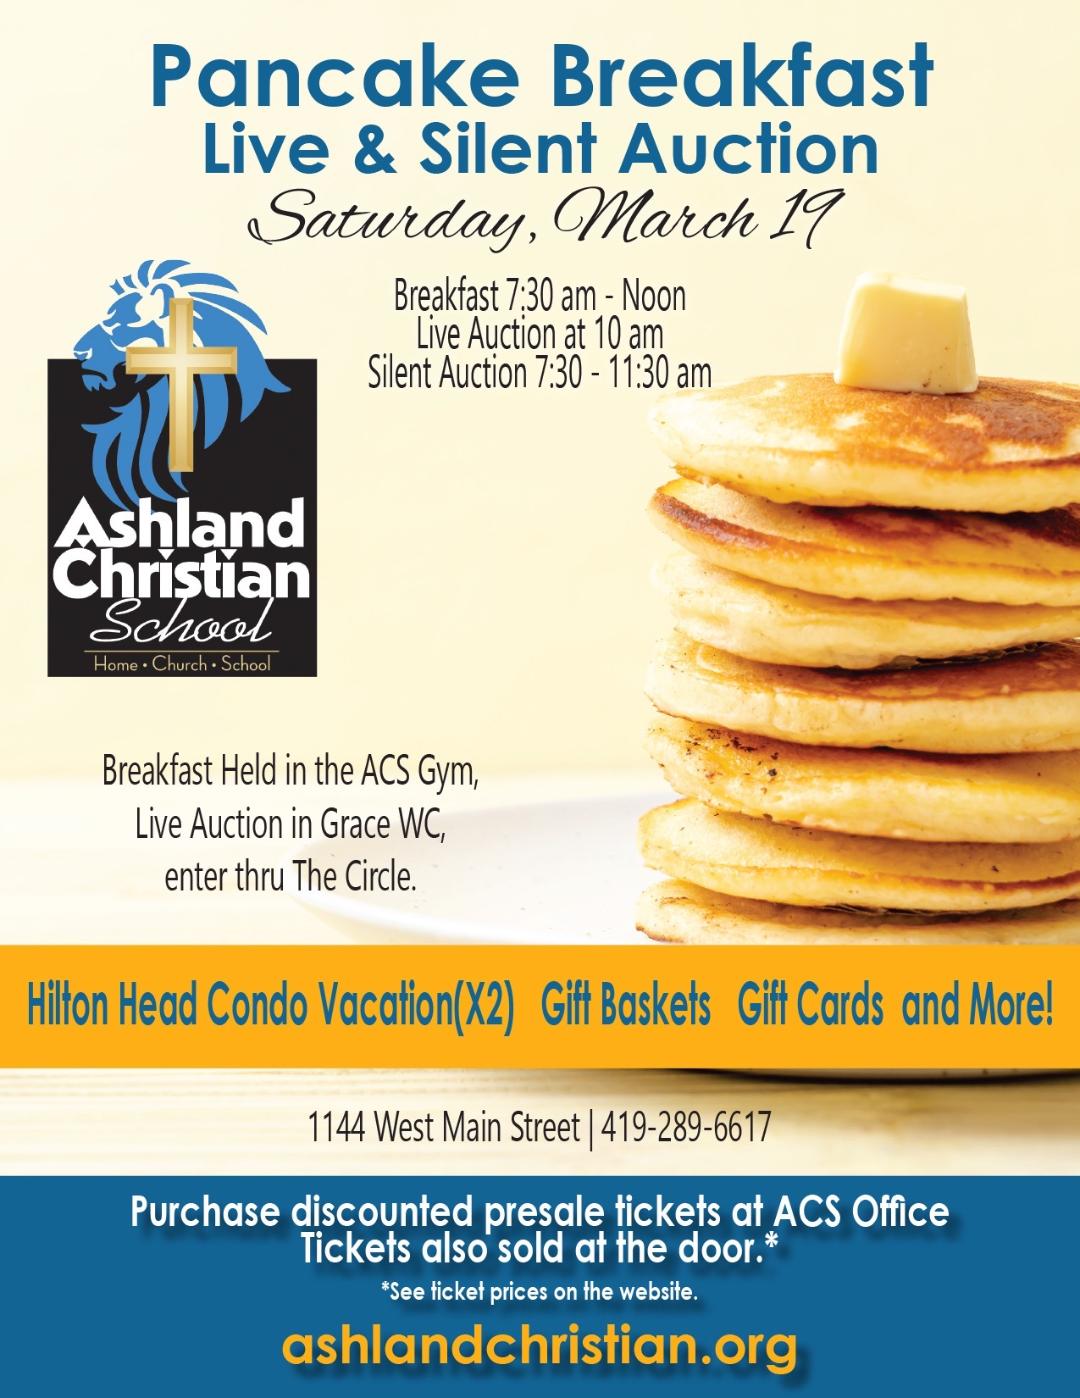 2022 ACS Pancake Breakfast and Live/Silent Auctions